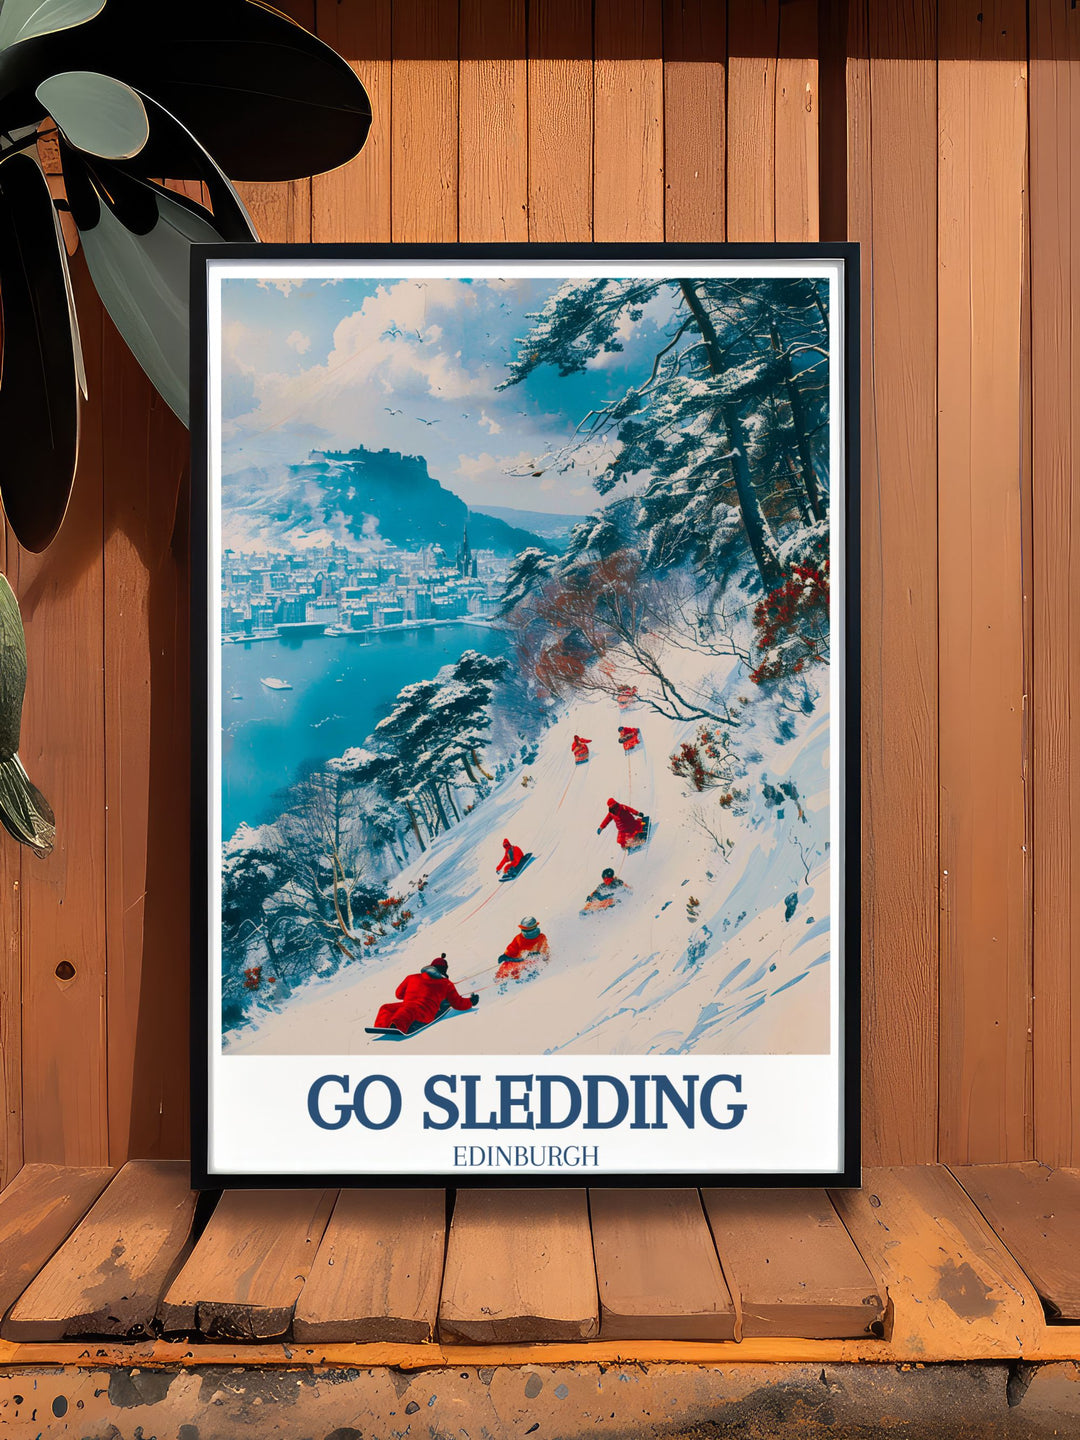 Vintage poster celebrating the timeless tradition of sledding at Arthurs Seat, capturing the nostalgic charm of winter activities in Edinburgh.